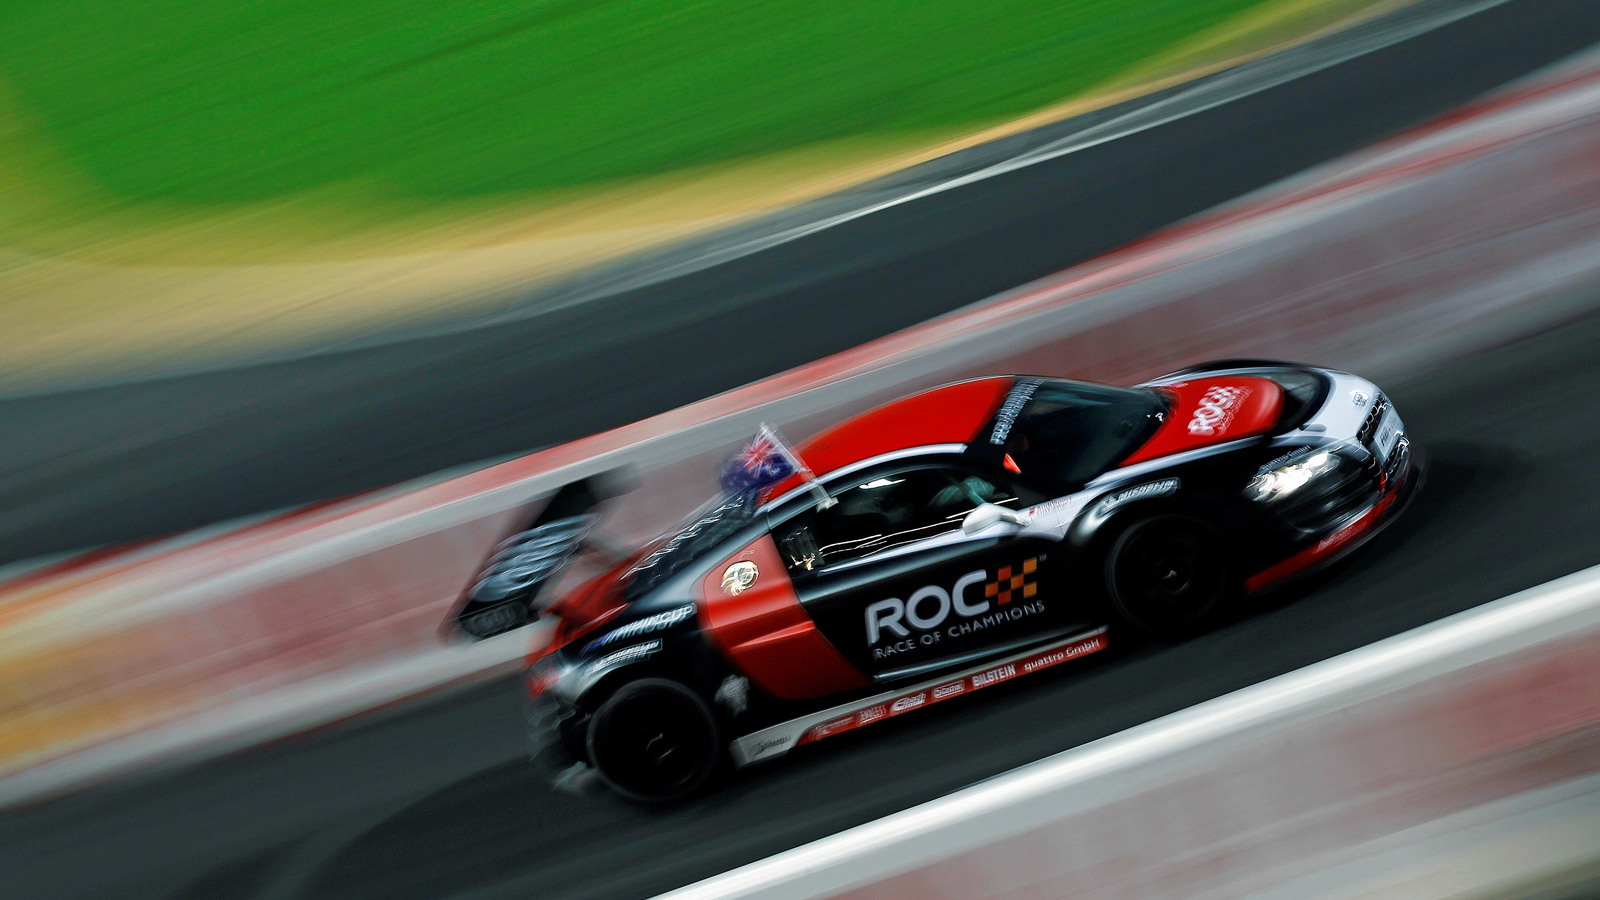 2012 ROC - Image courtesy of Race Of Champions